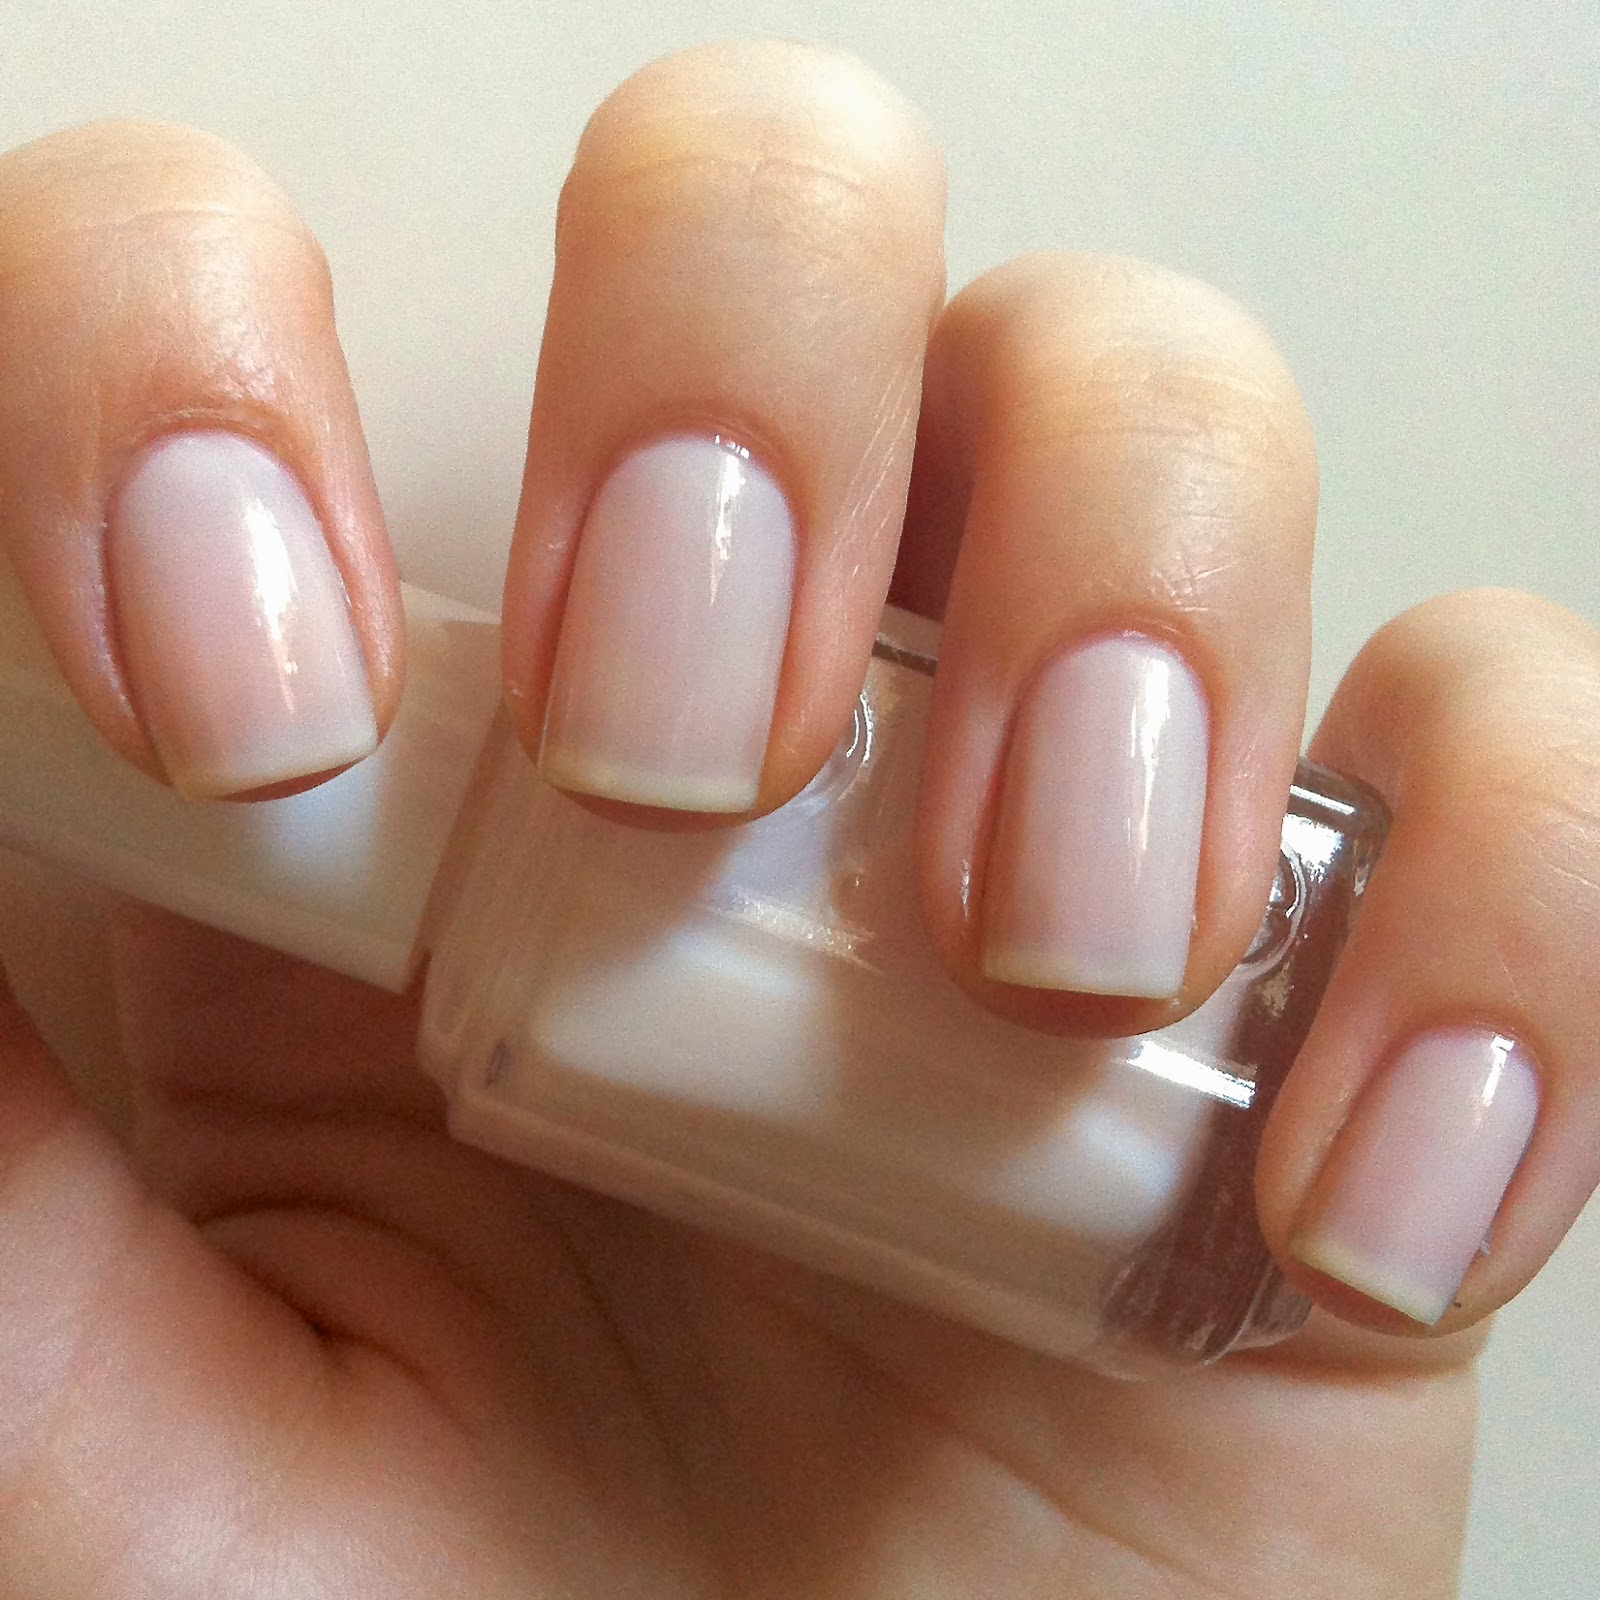 Nails Always Polished: Rose Gold French Manicure